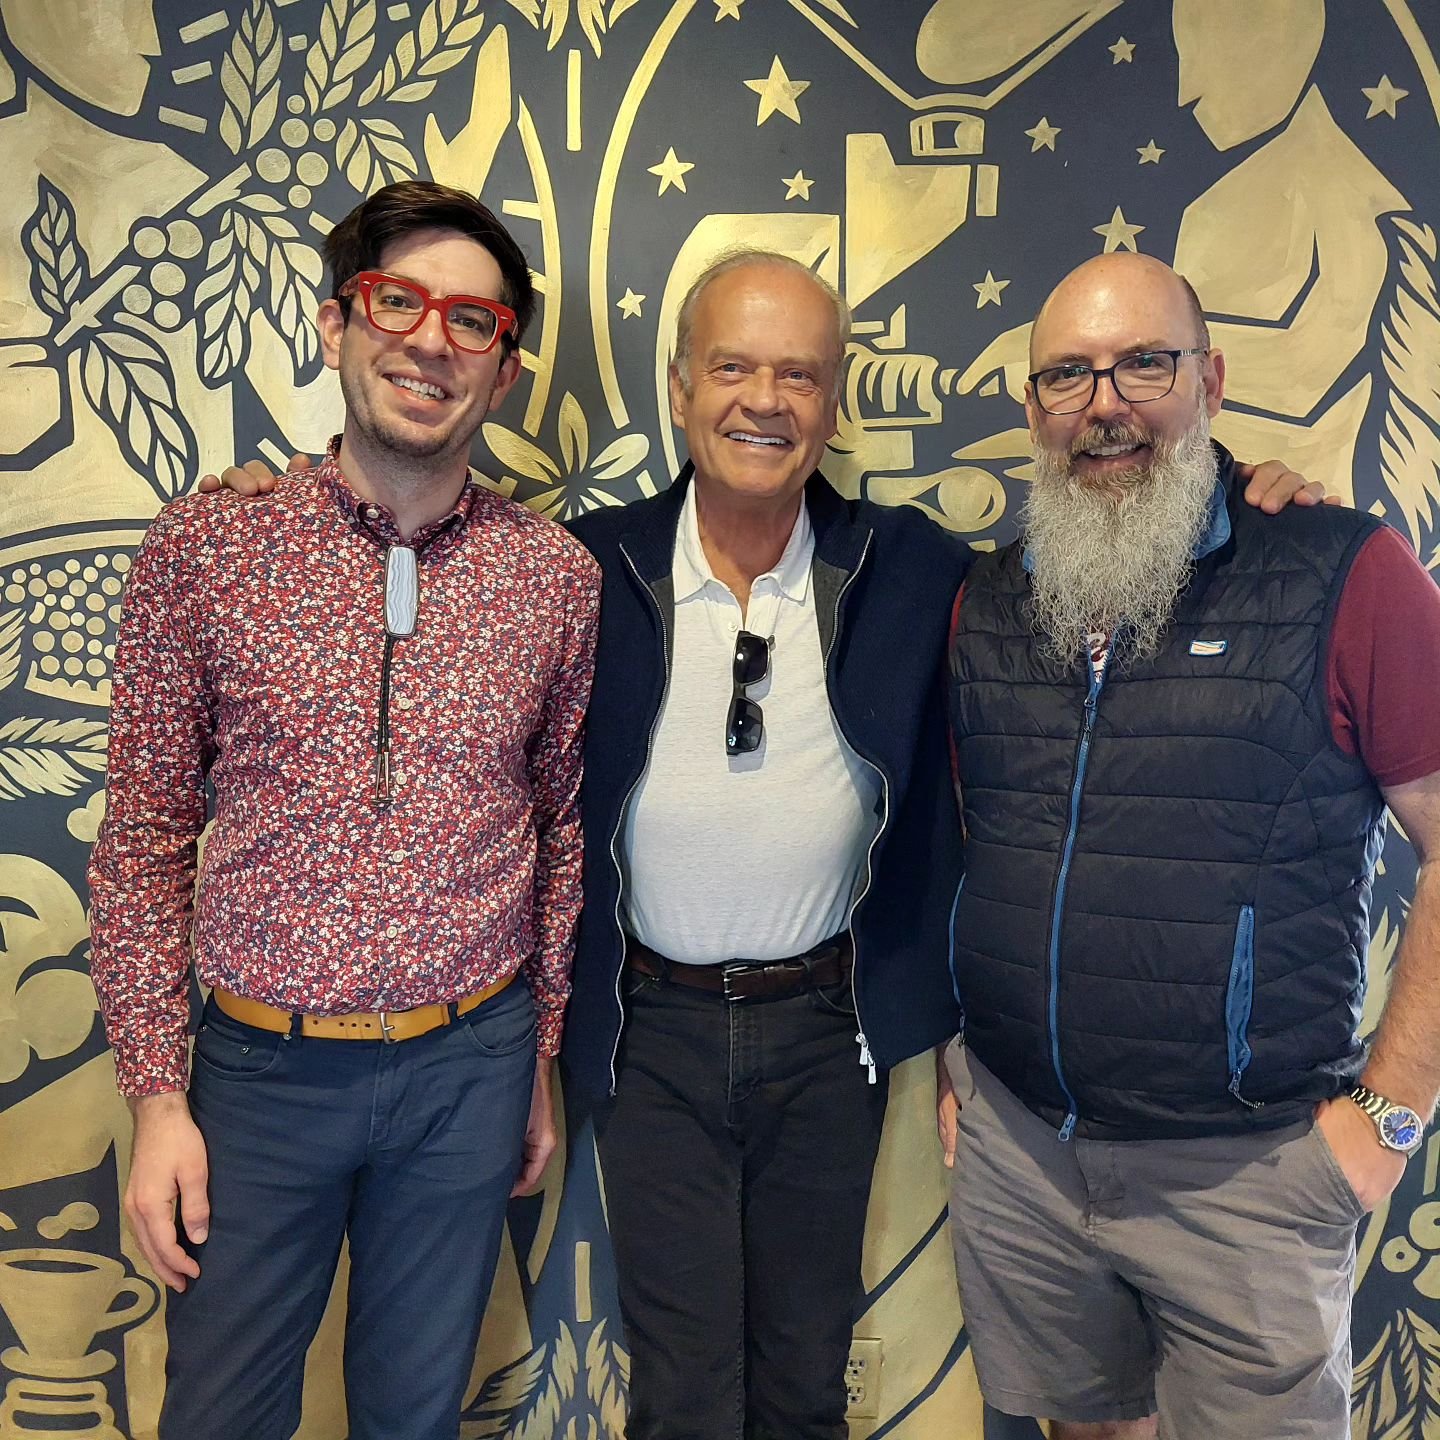 It was fun chatting with Kelsey Grammer in the caf&eacute; today. He is in town for a performance of Candide with @wichitagrandopera this weekend.